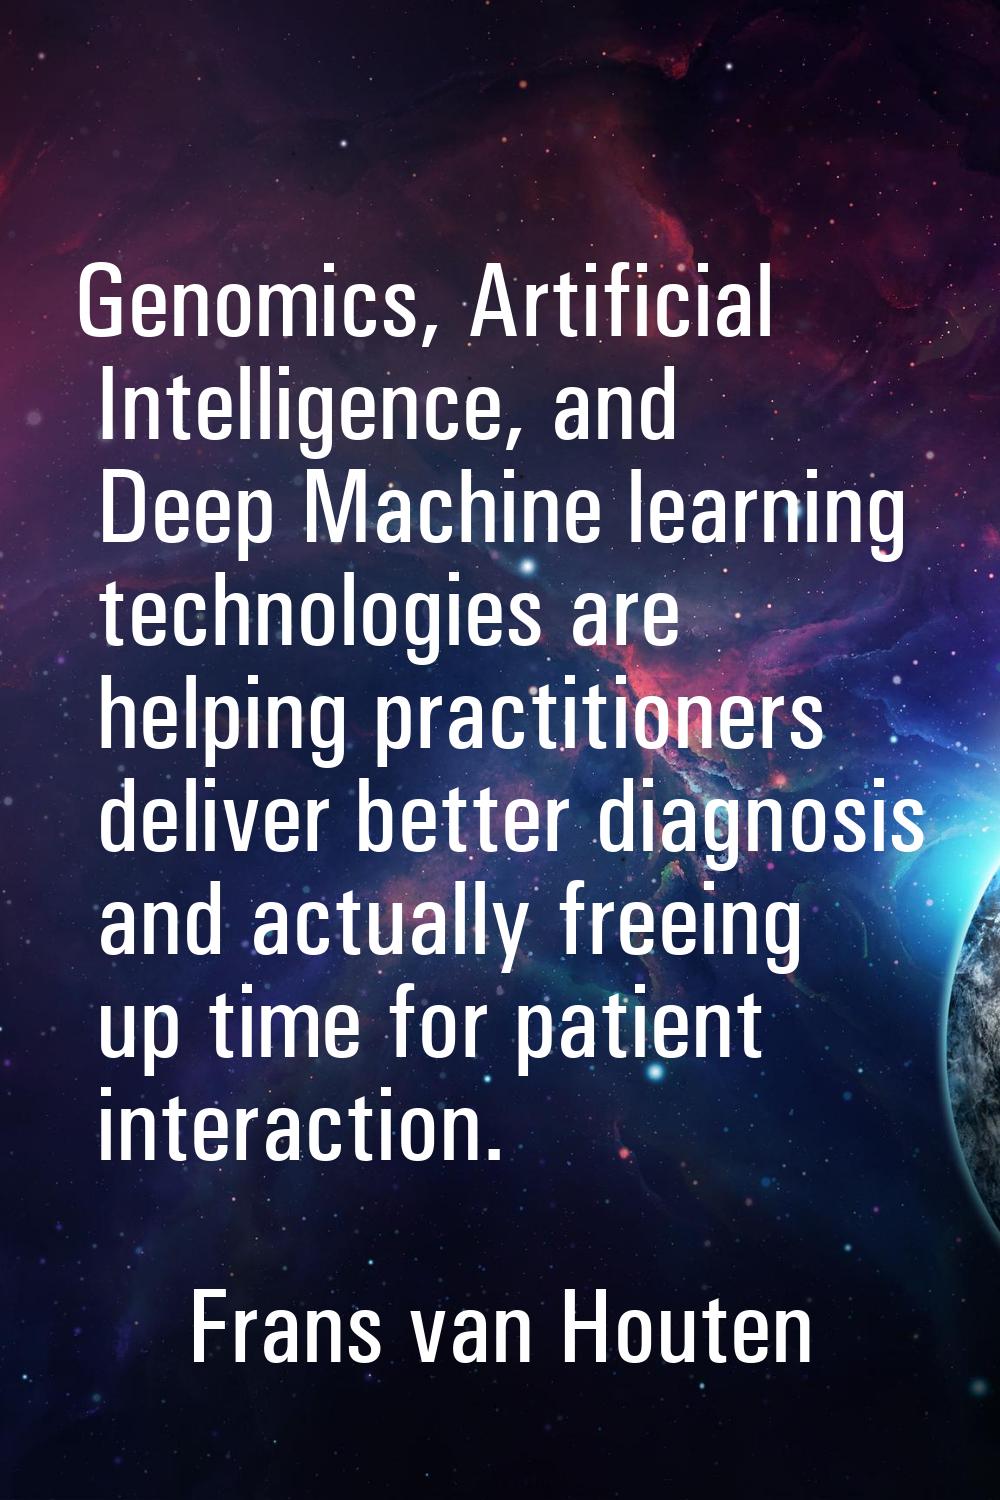 Genomics, Artificial Intelligence, and Deep Machine learning technologies are helping practitioners